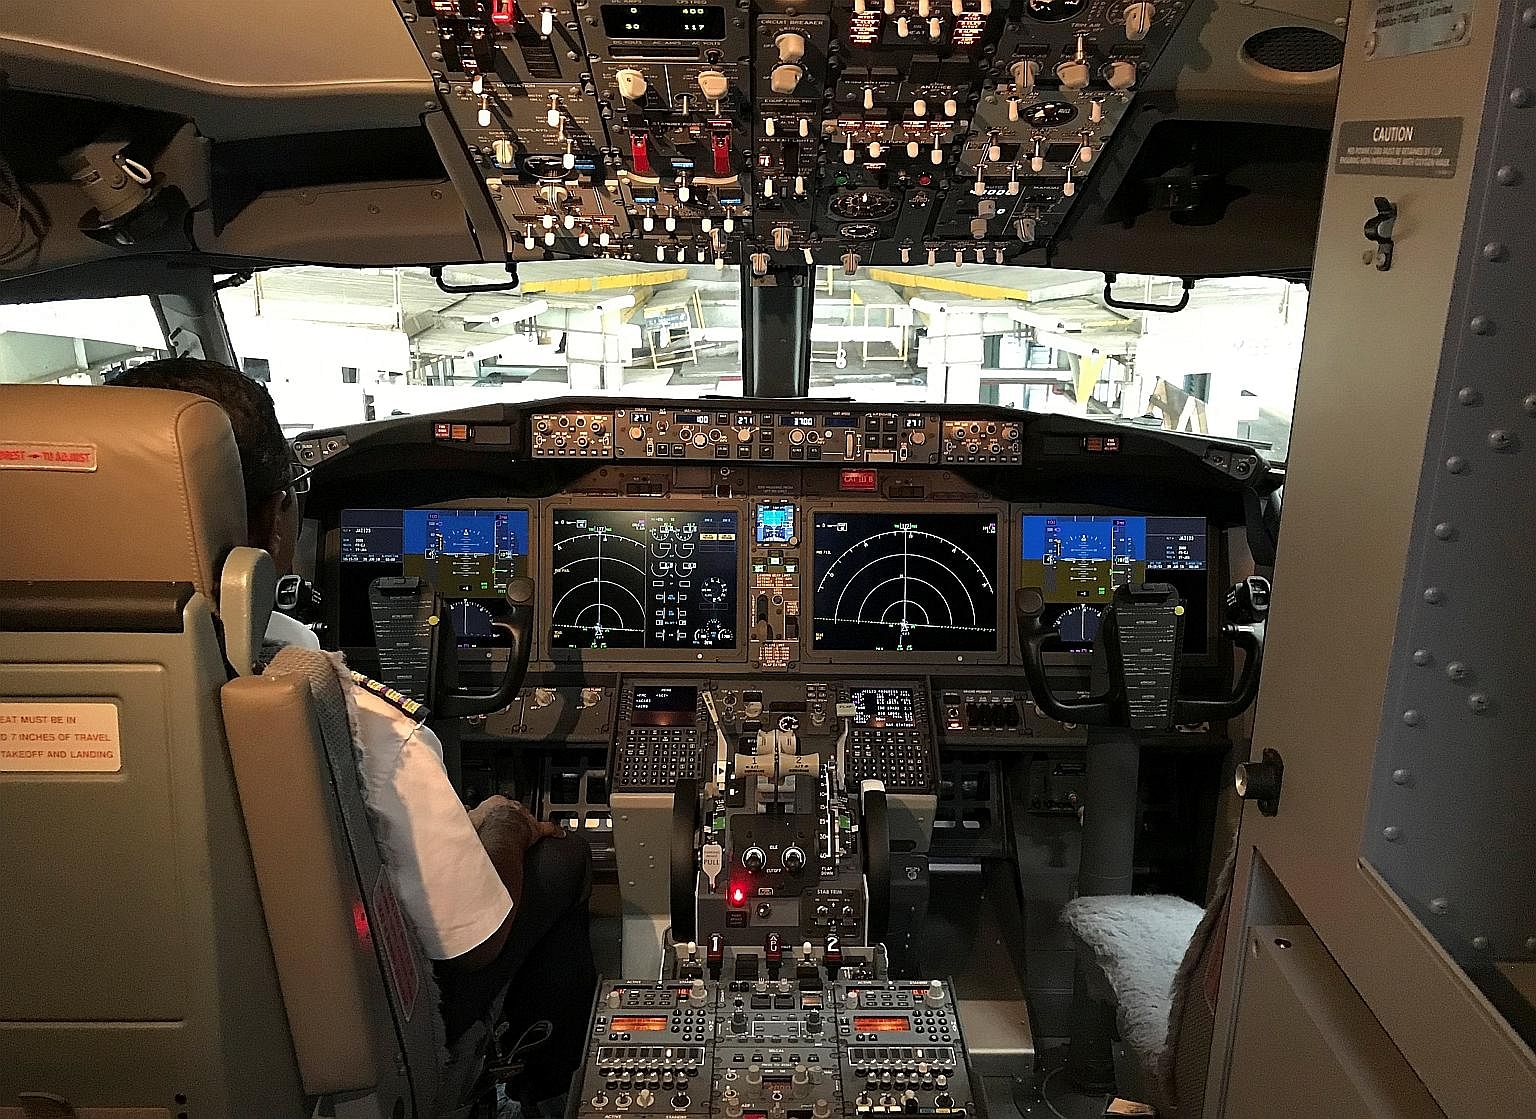 The cockpit of a Boeing 737 Max 8. Over the years, advancements in automation and technology have made planes smarter and safer, with backups for everything. The problem is when an over-reliance on these systems makes pilots less confident of their o